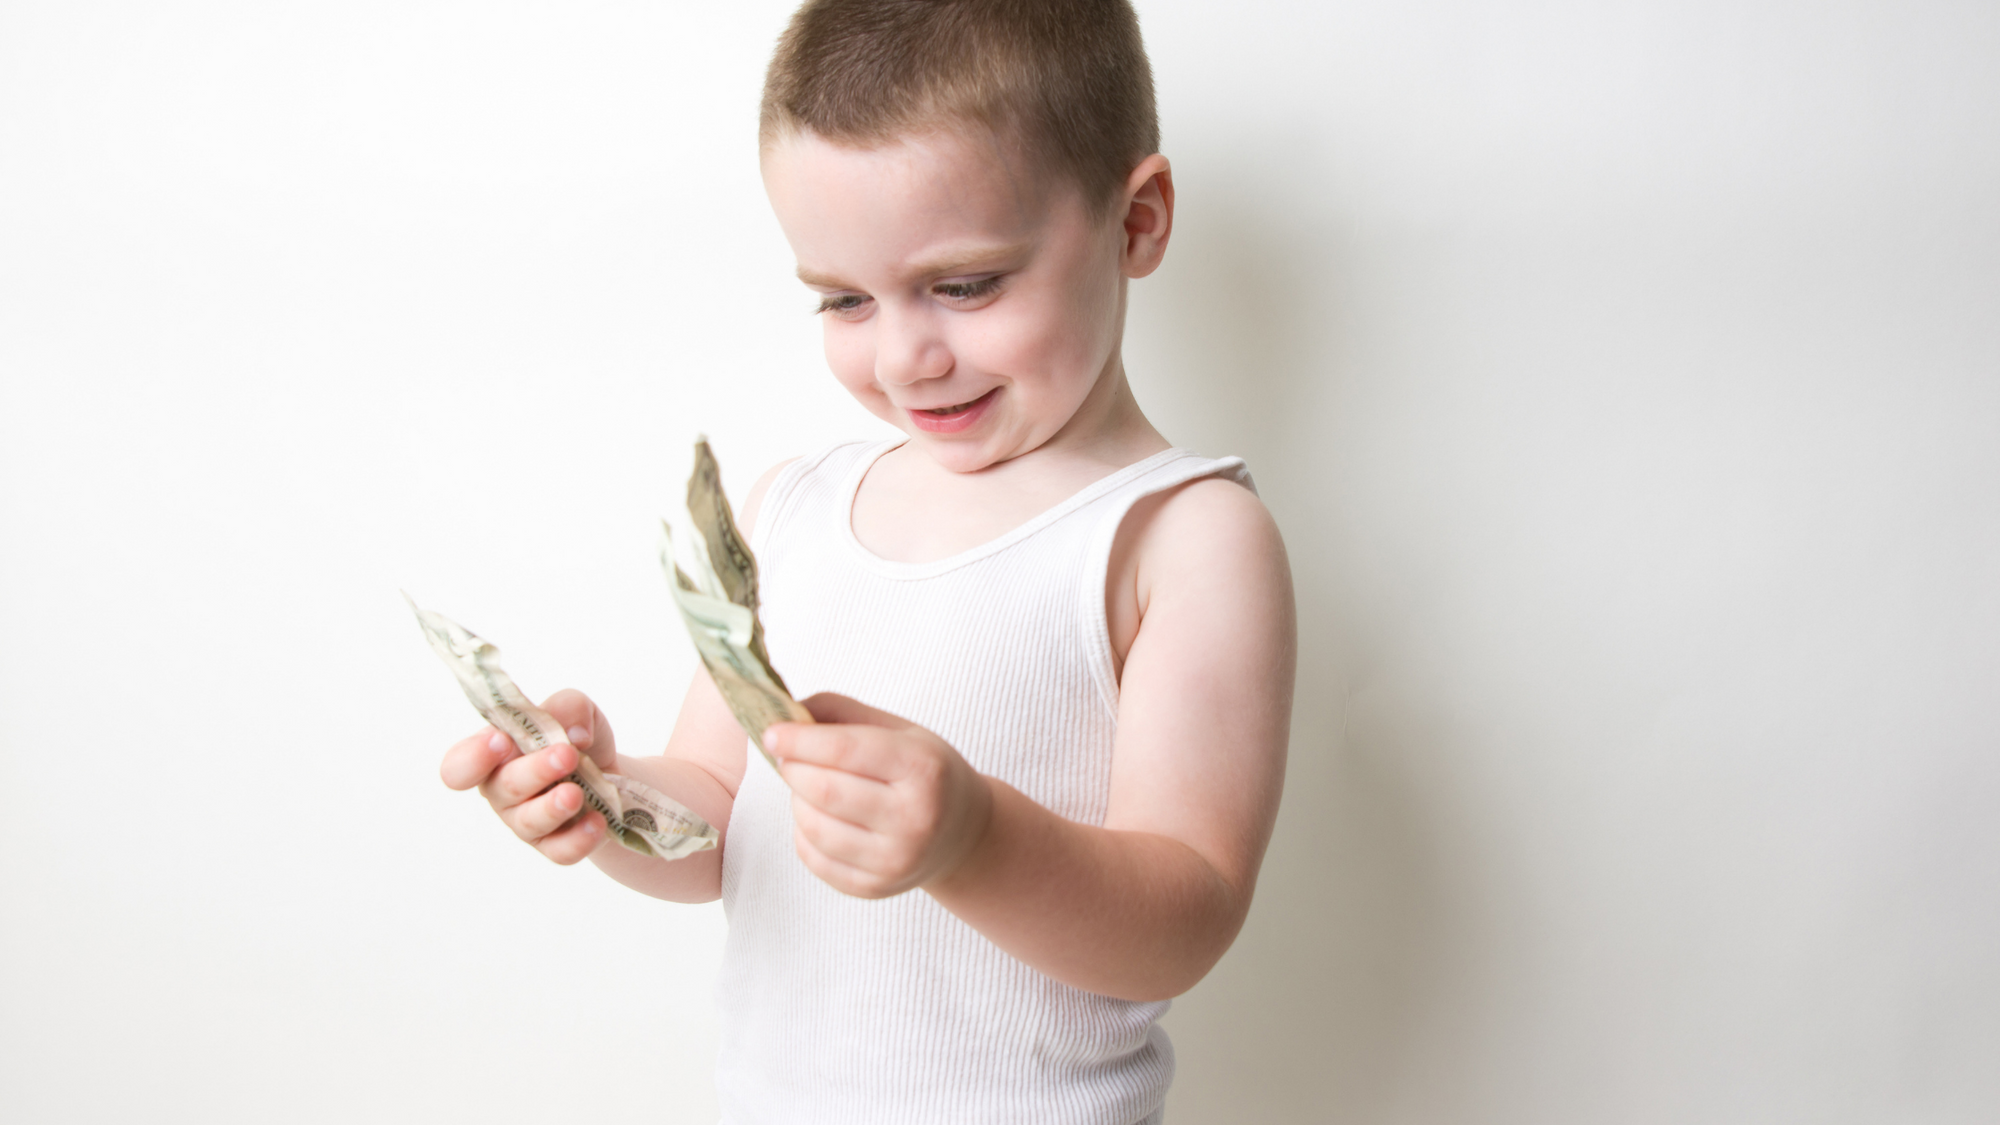 Simple & Effective Money-Saving Tips For Families